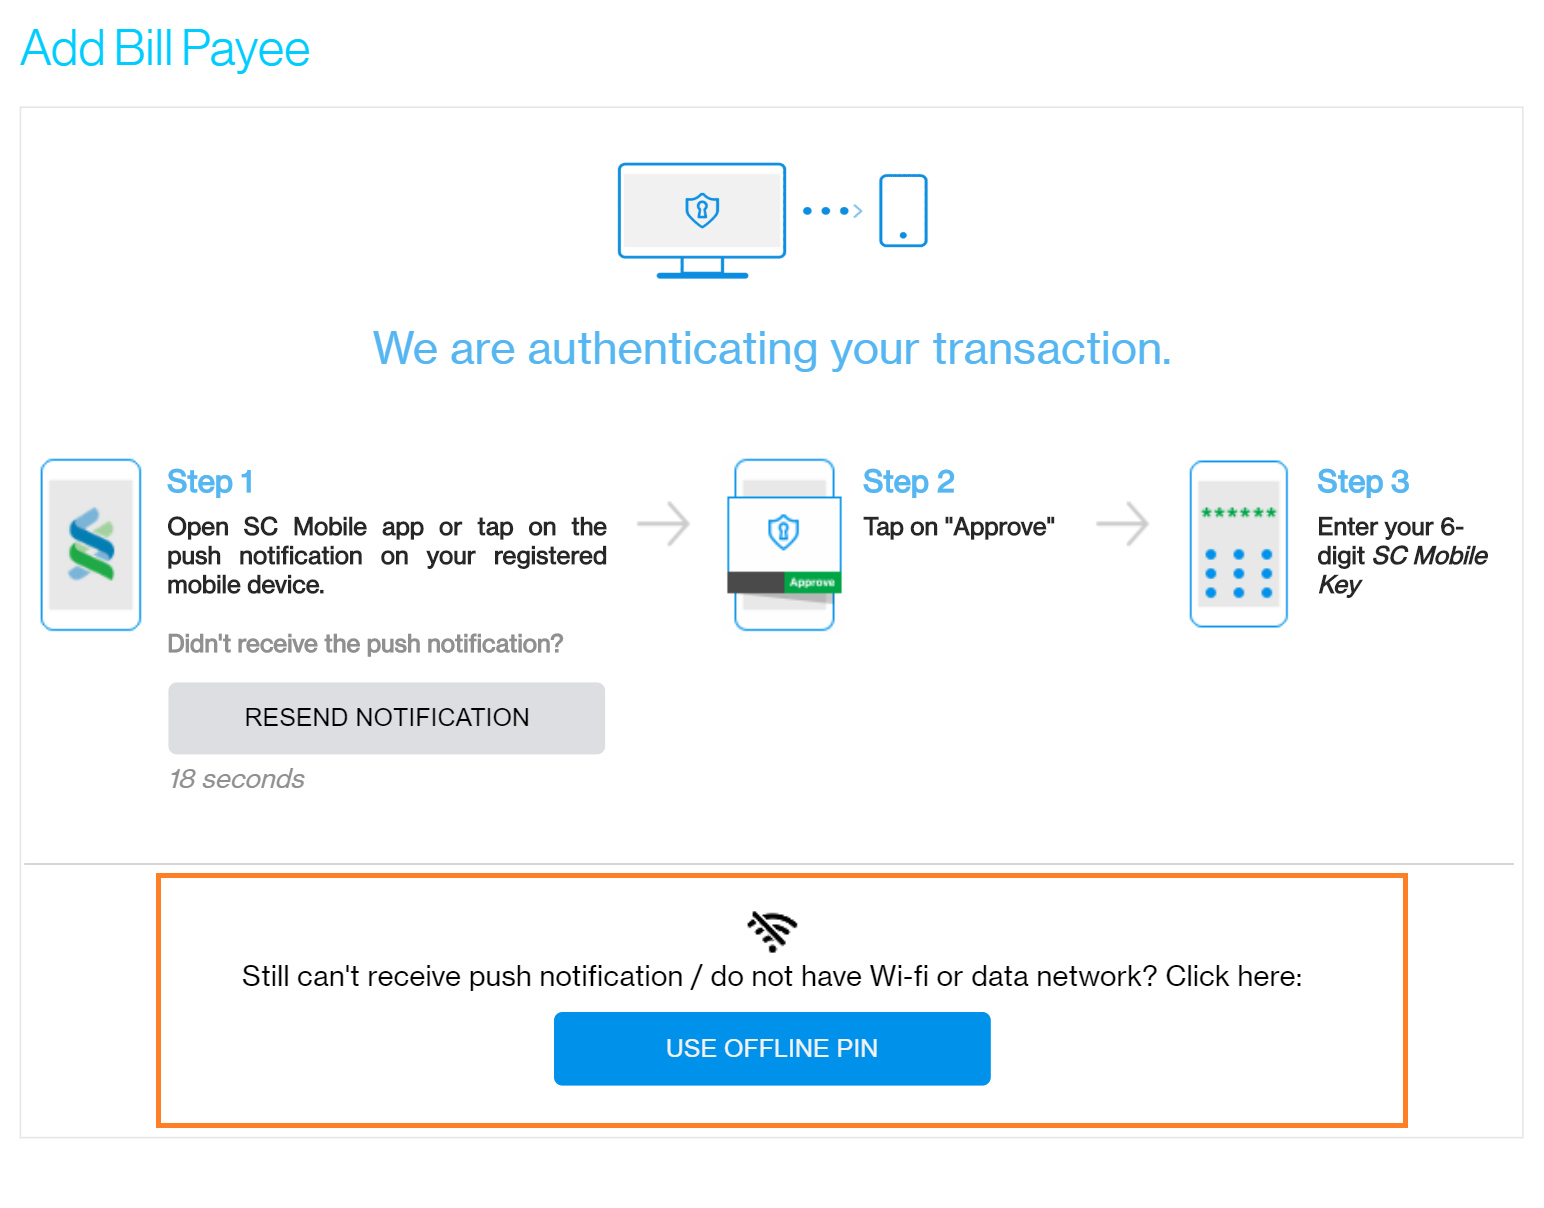 Using Offline PIN for online banking transaction - Step 1